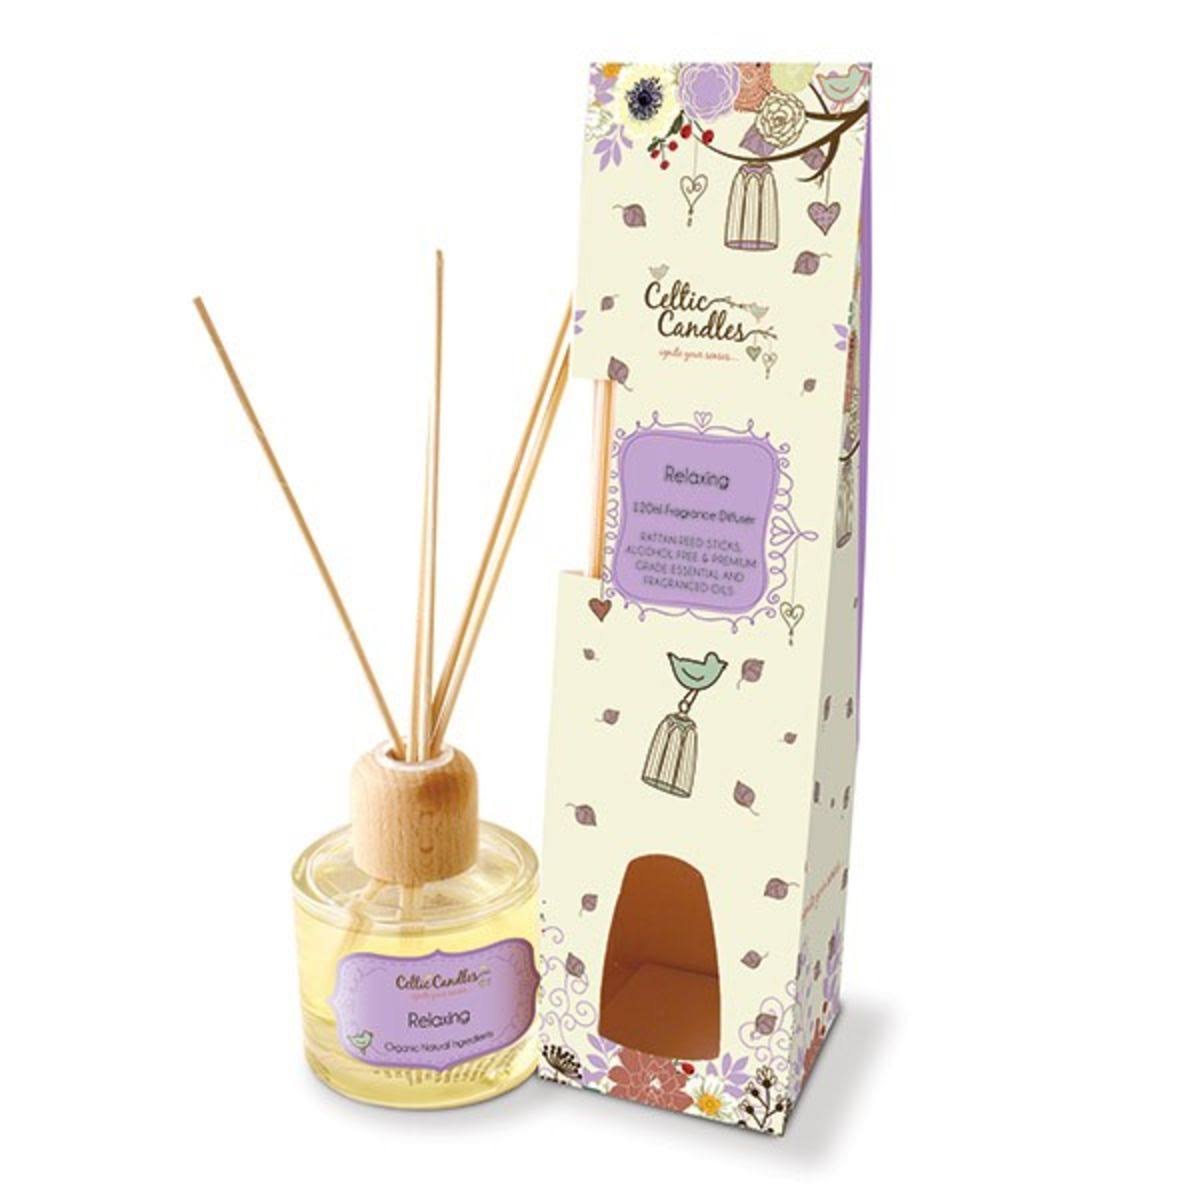 Celtic Candles Relaxing Reed Diffuser